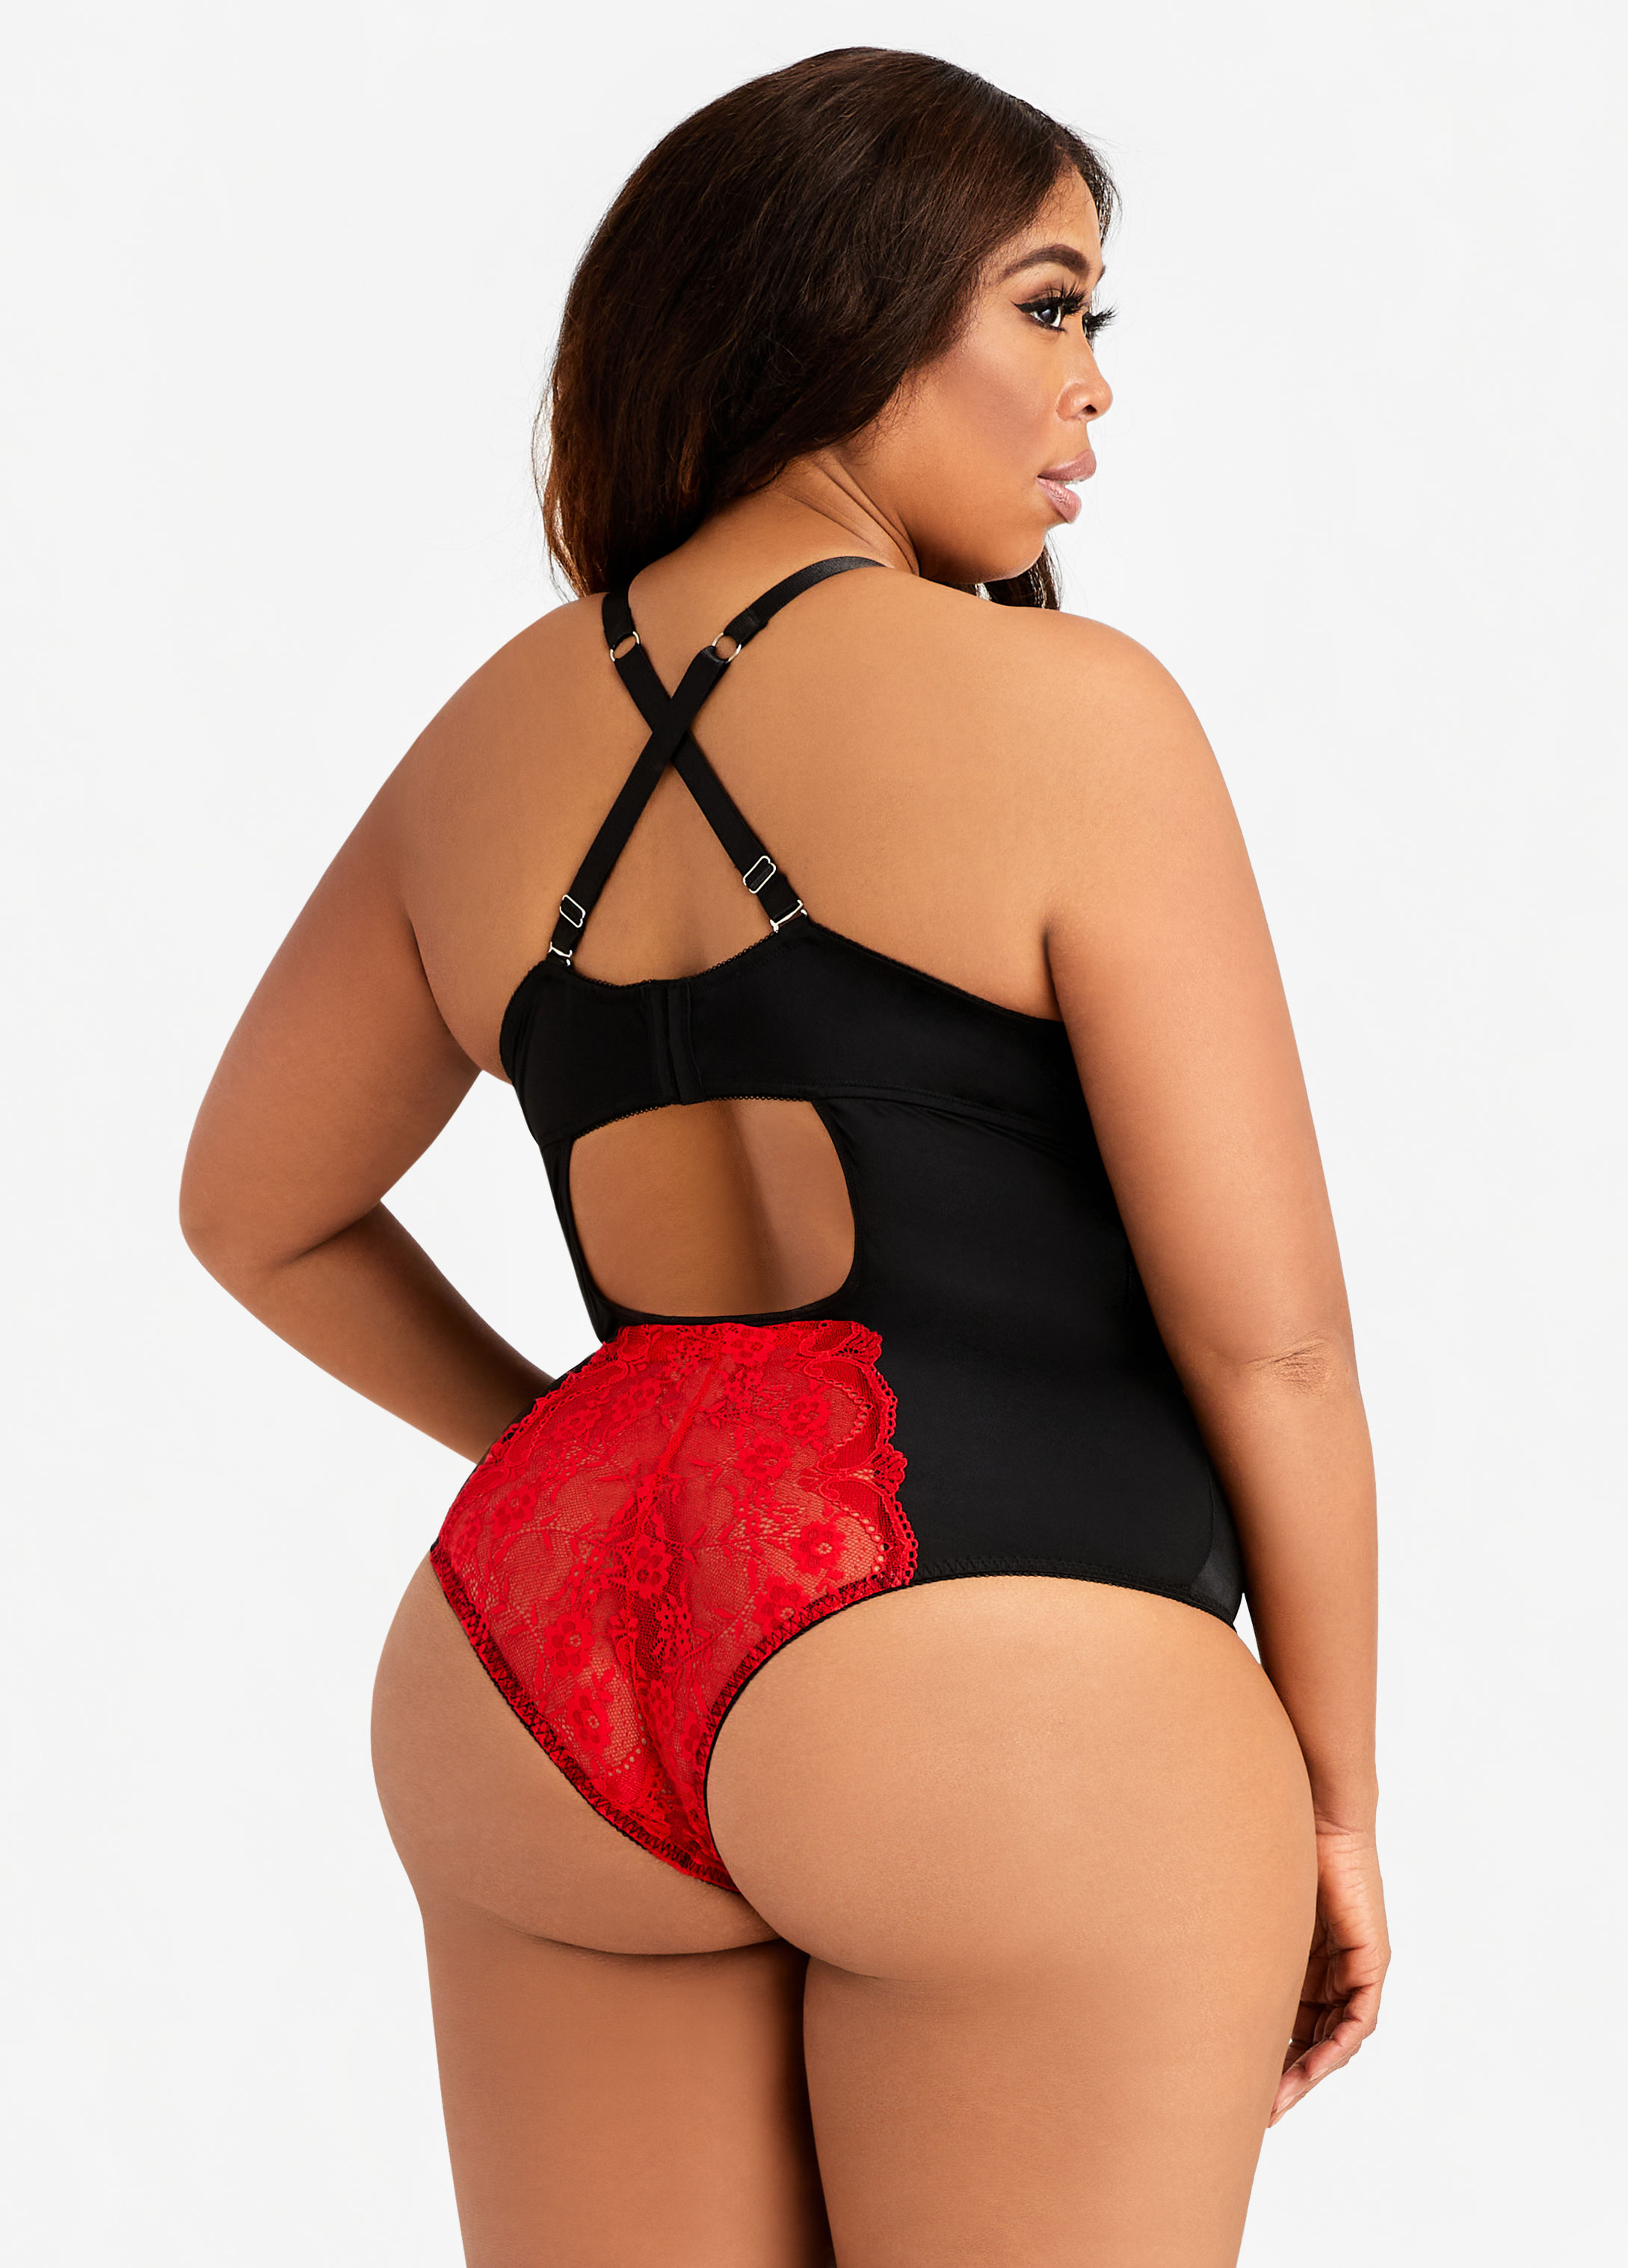  Adore Me, Sexy Lingerie For Women, Scoria Unlined One Piece  Floral Lace Sexy Bodysuit, Designed With Underwire Support, Black